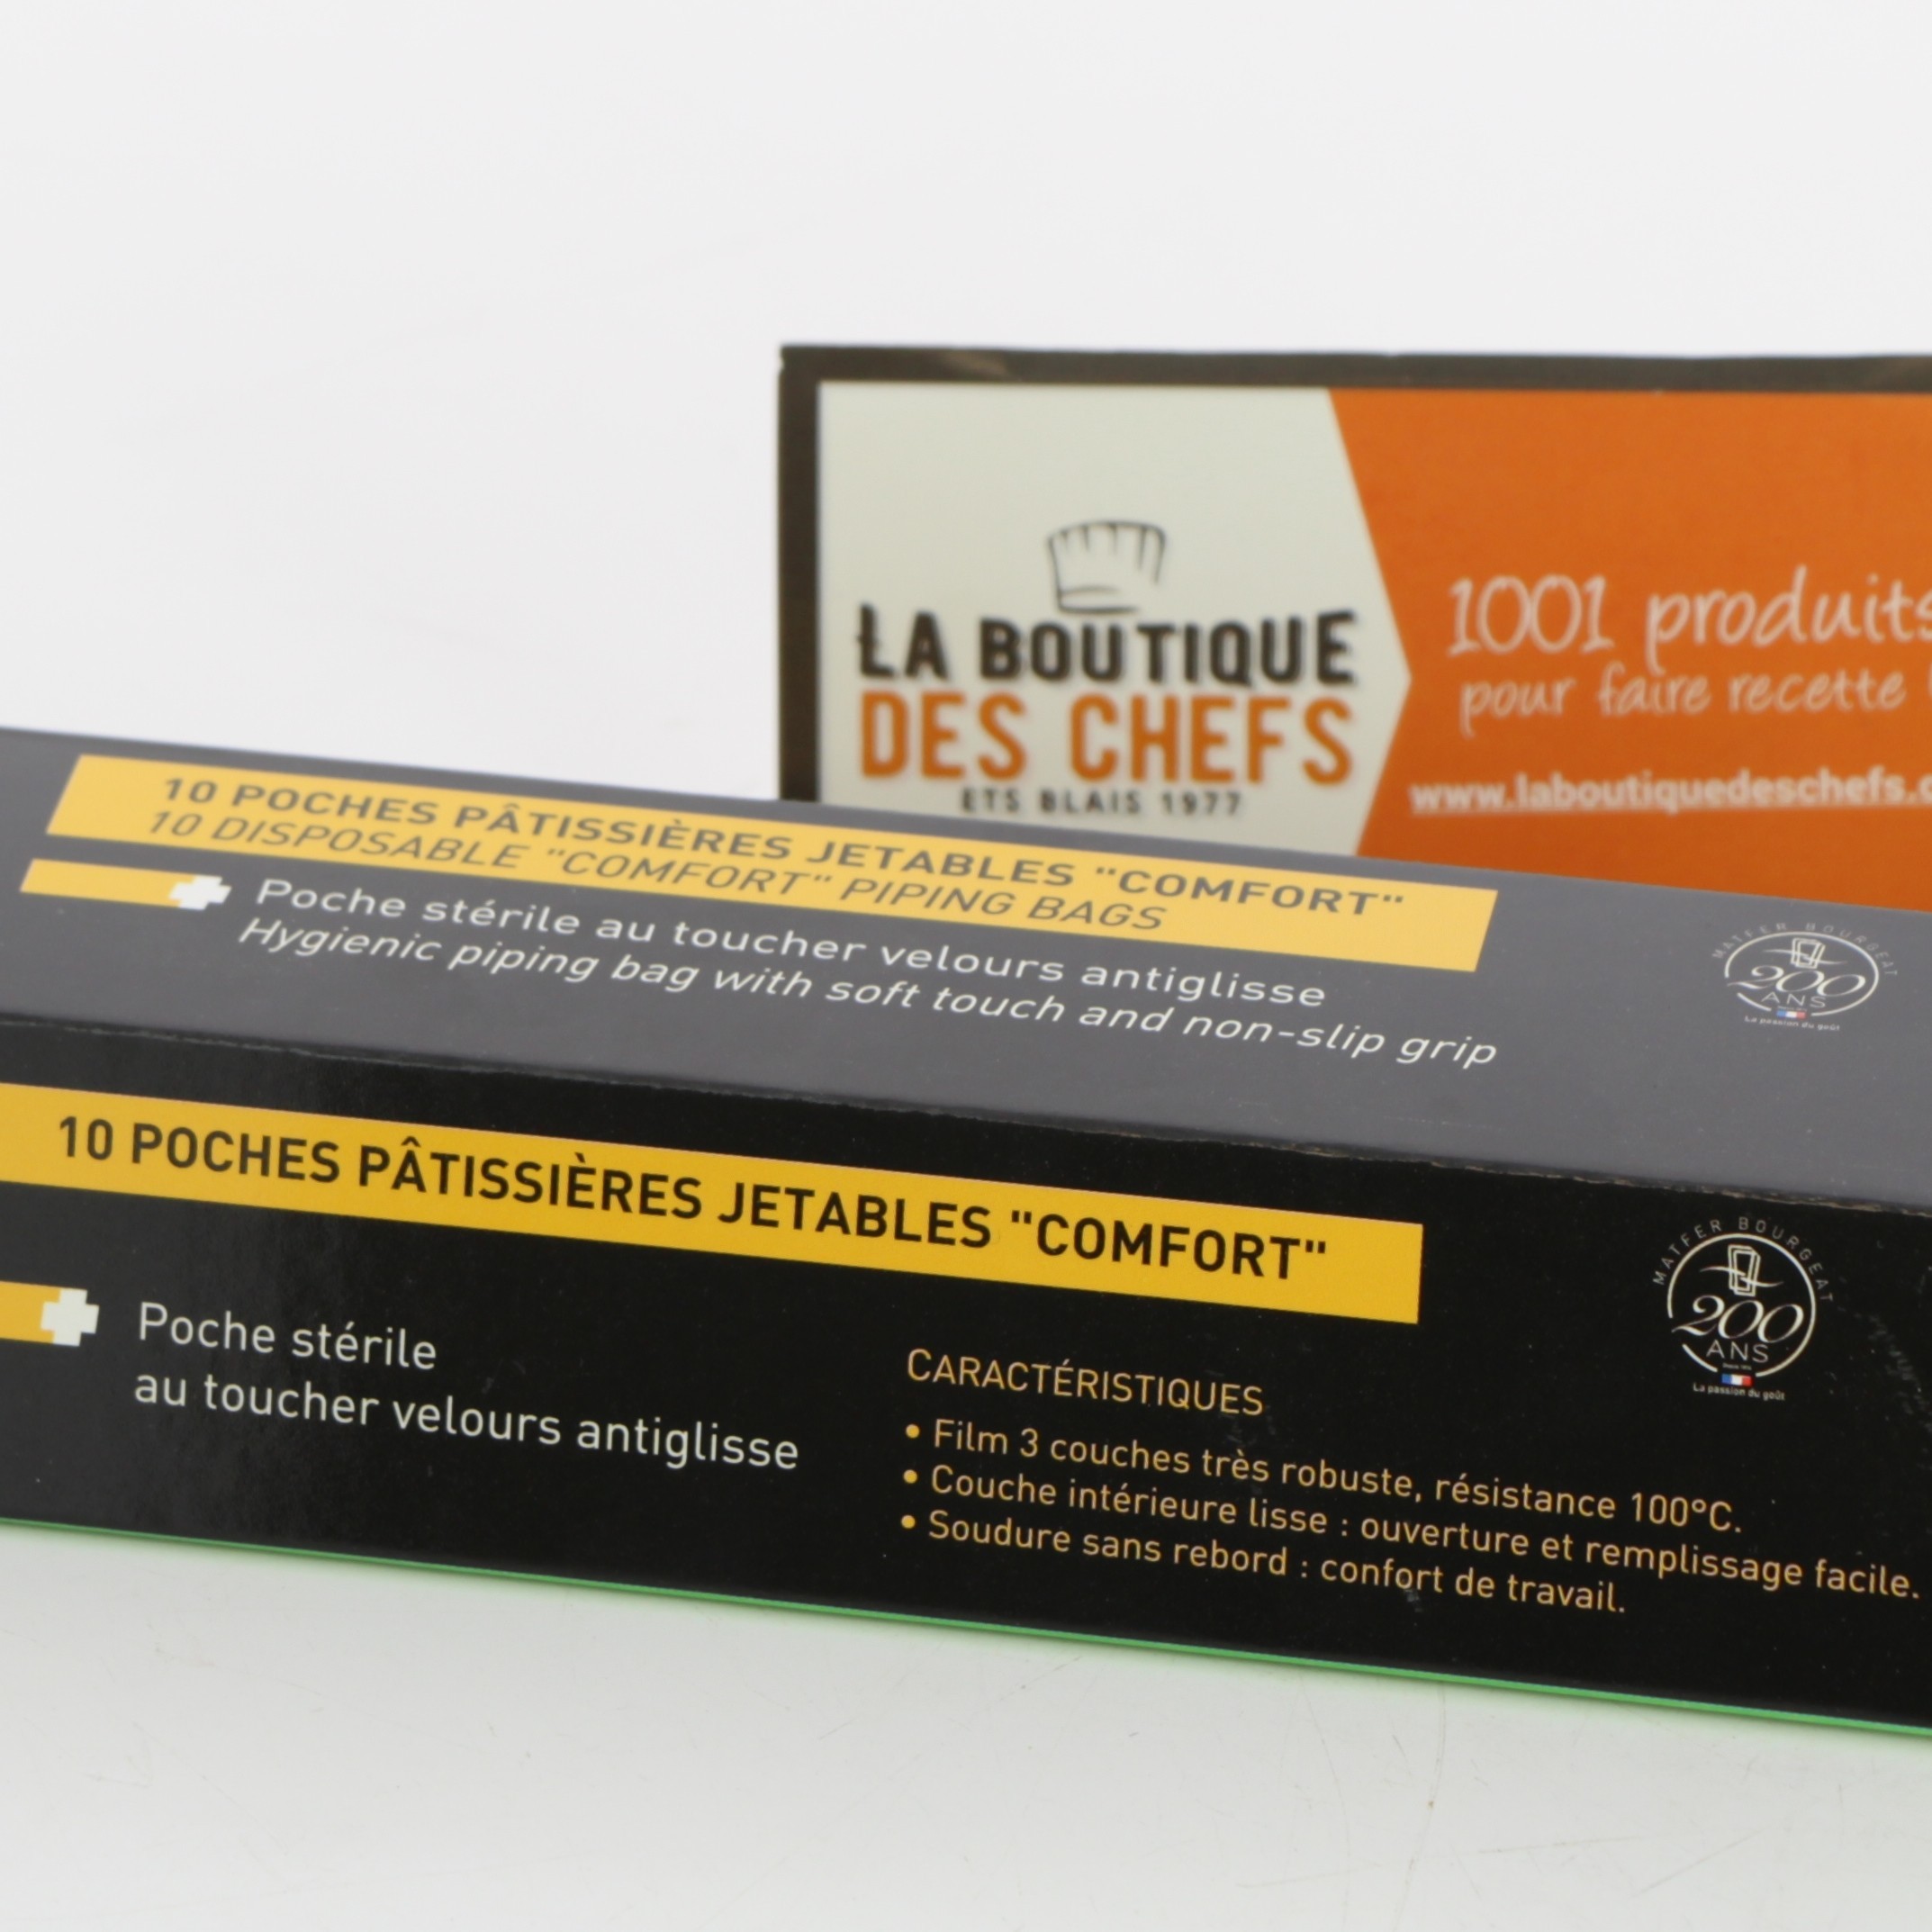 Poches à Douille Patisserie Jetable Biobased Comfort Green 12 pcs